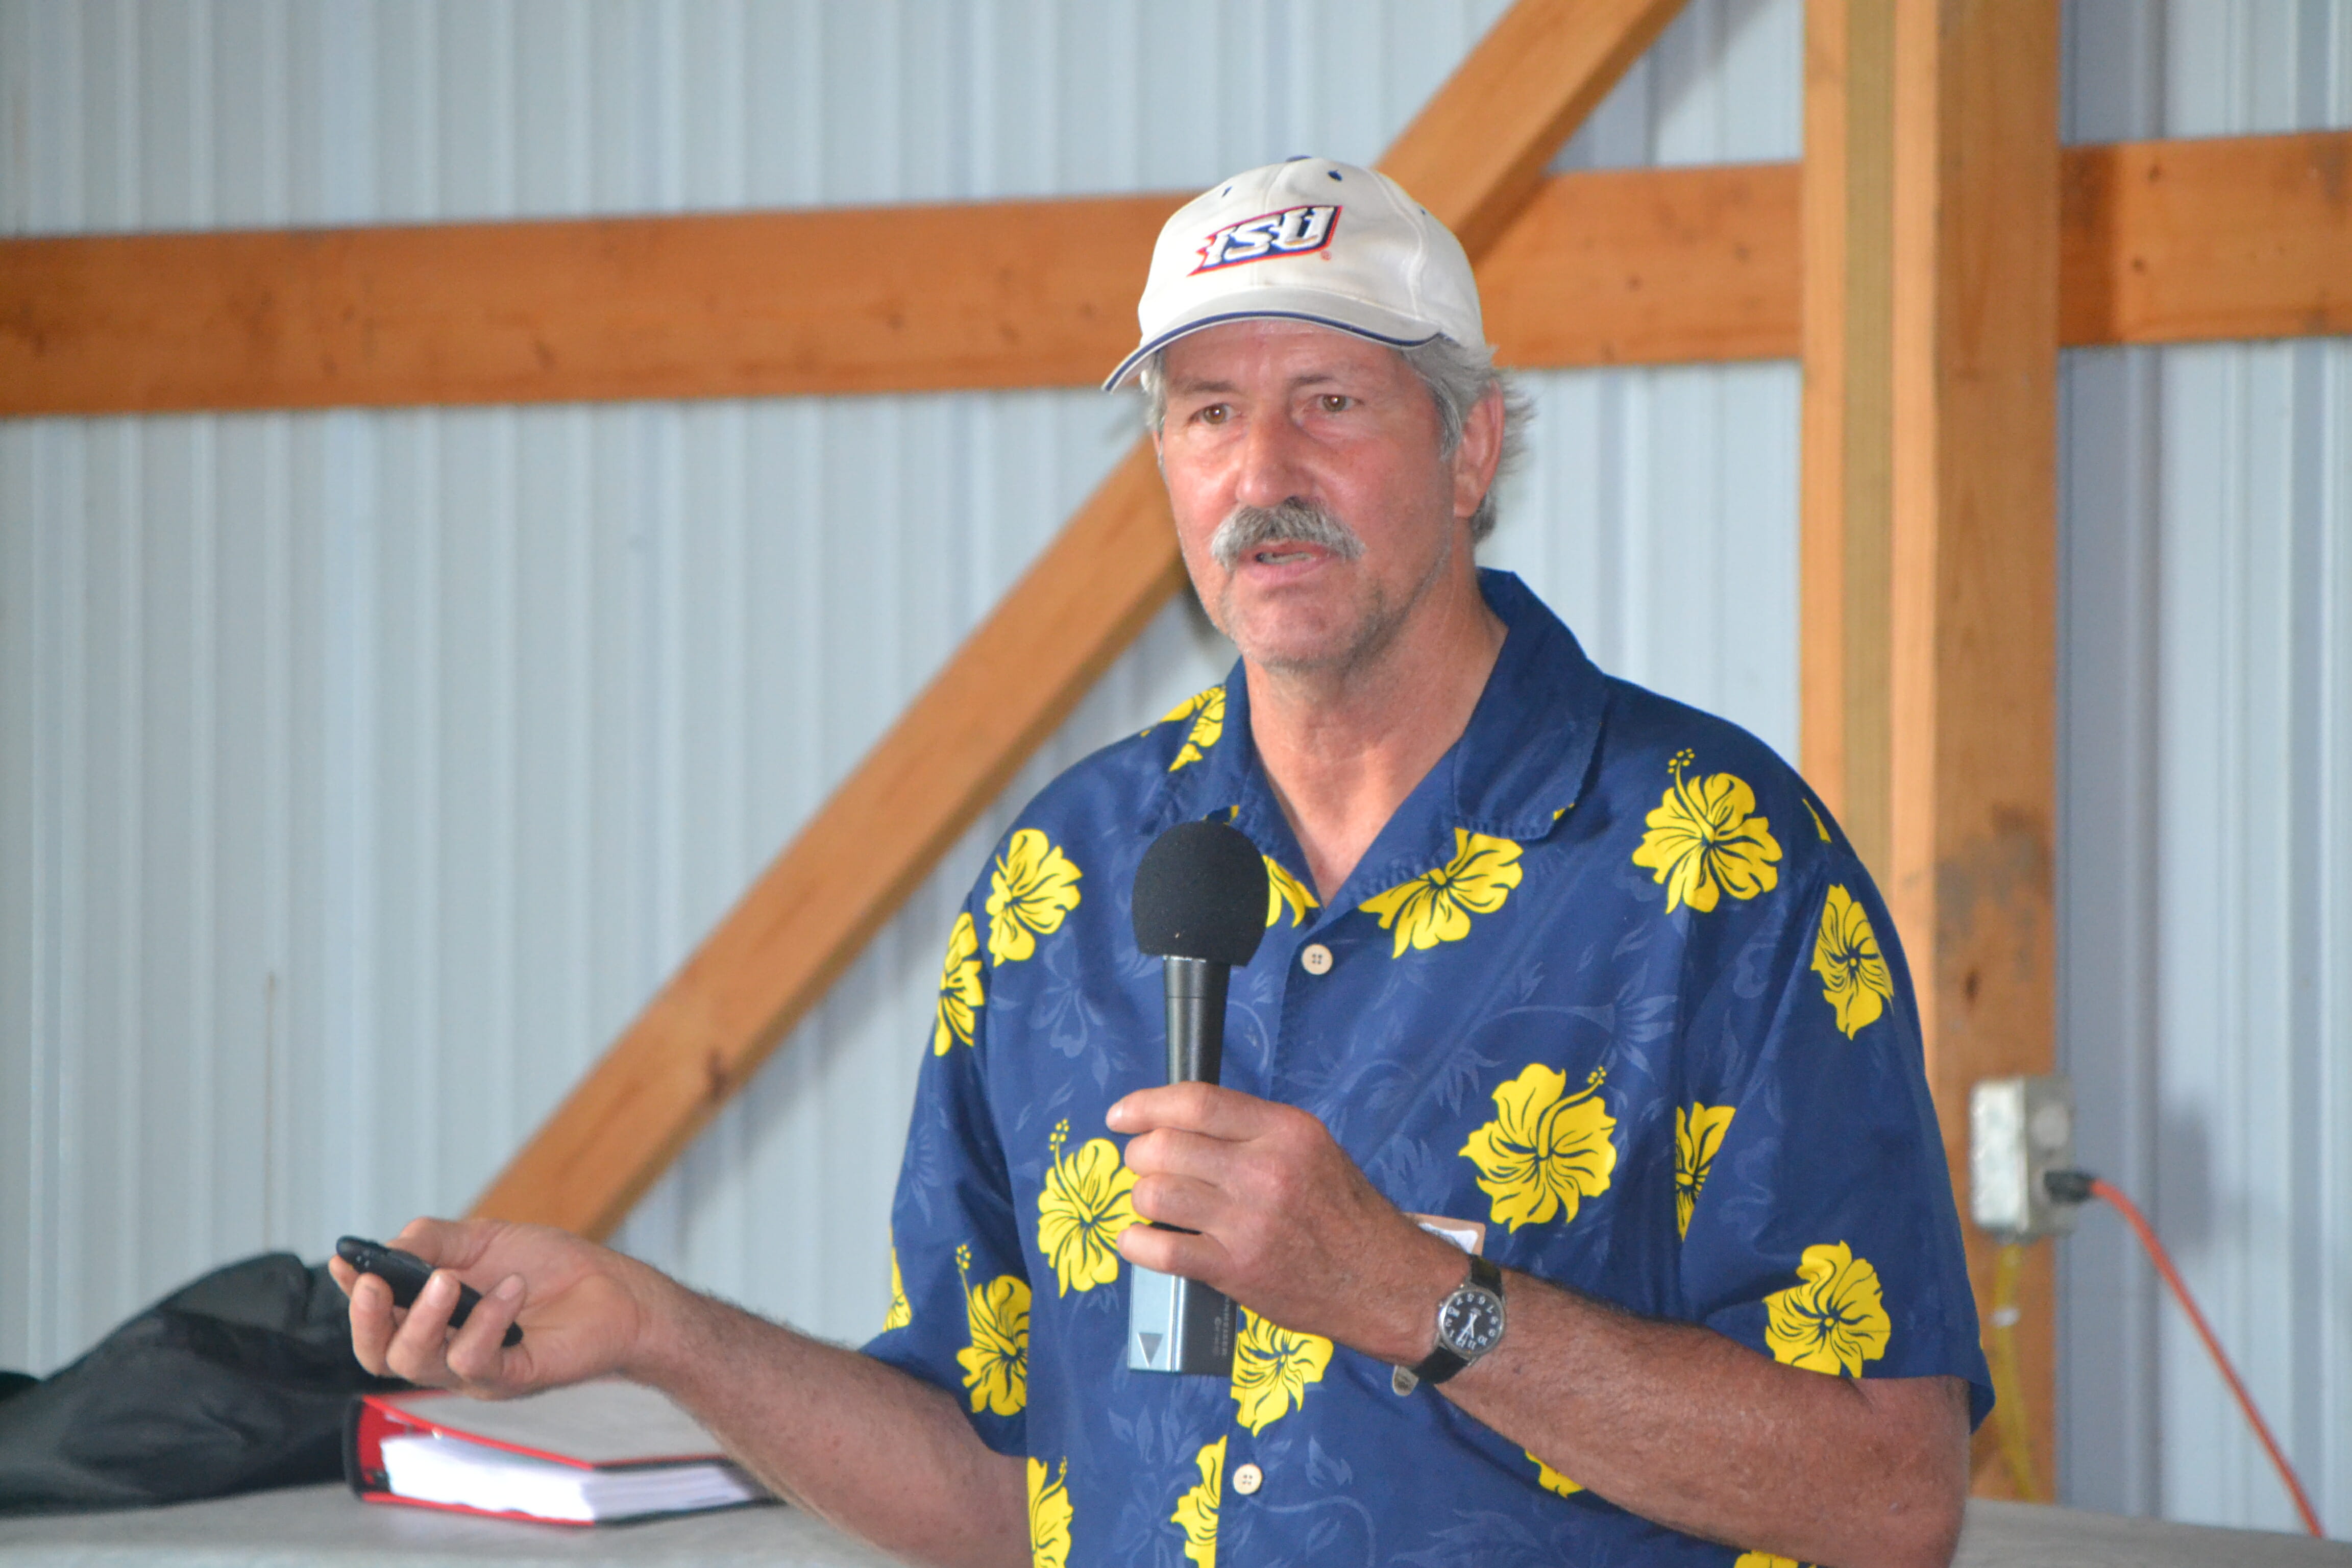 Long-time PFI member Paul Mugge contributed to the discussion on weed control.